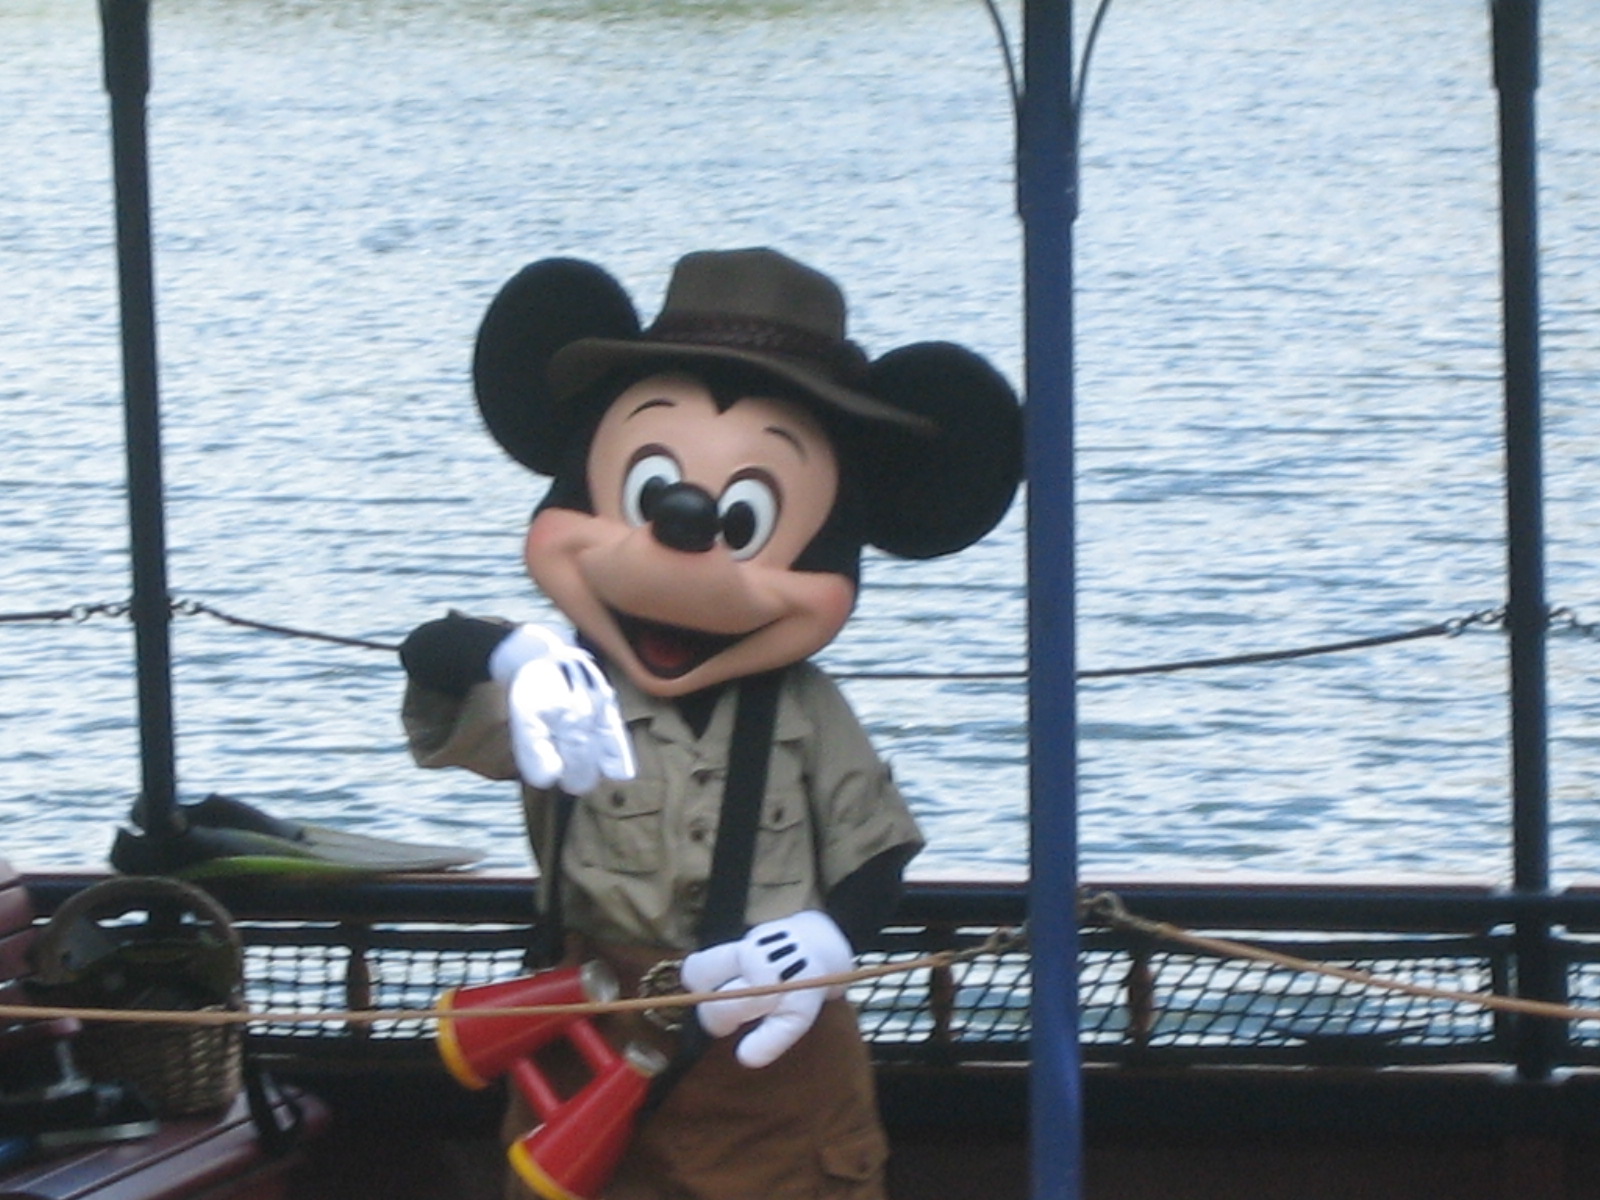 Animal Kingdom - Mickey Mouse on Character Boat